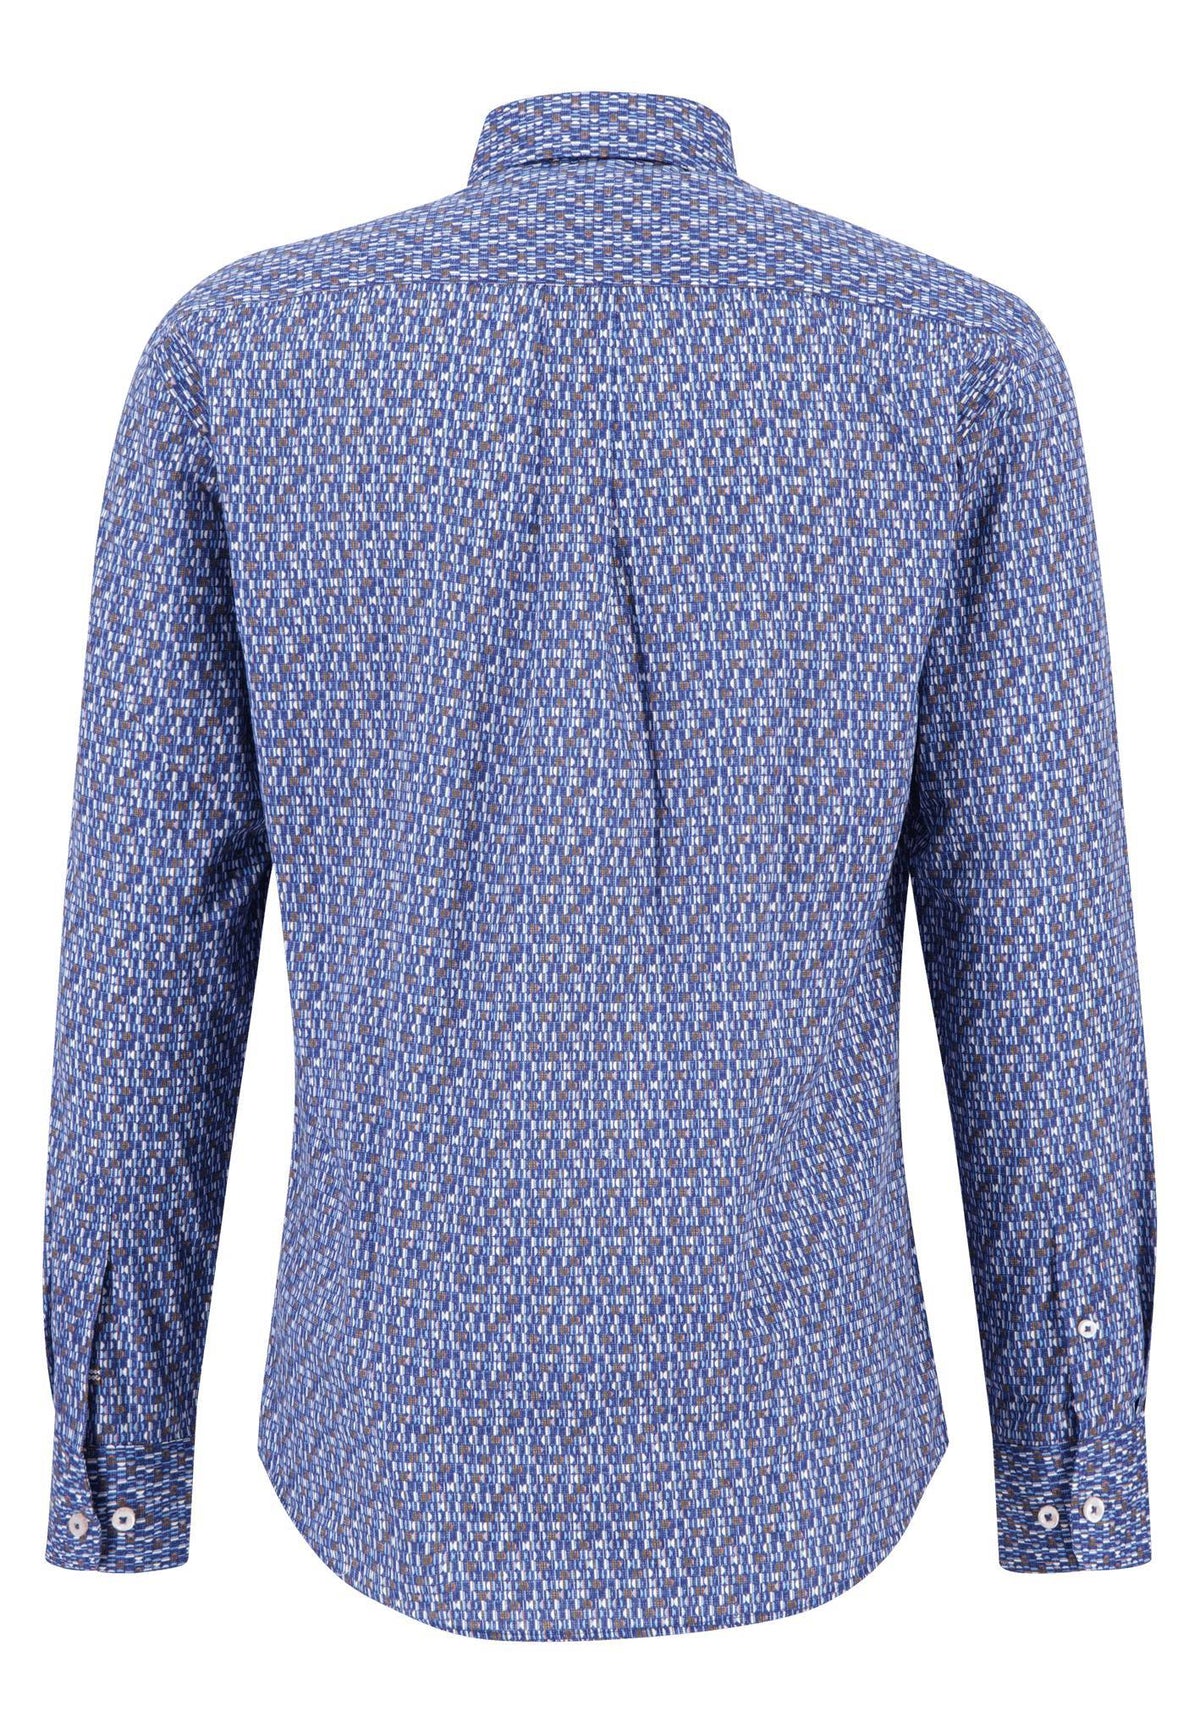 Fynch Hatton Patterned Long Sleeve Shirt With Button Down Collar